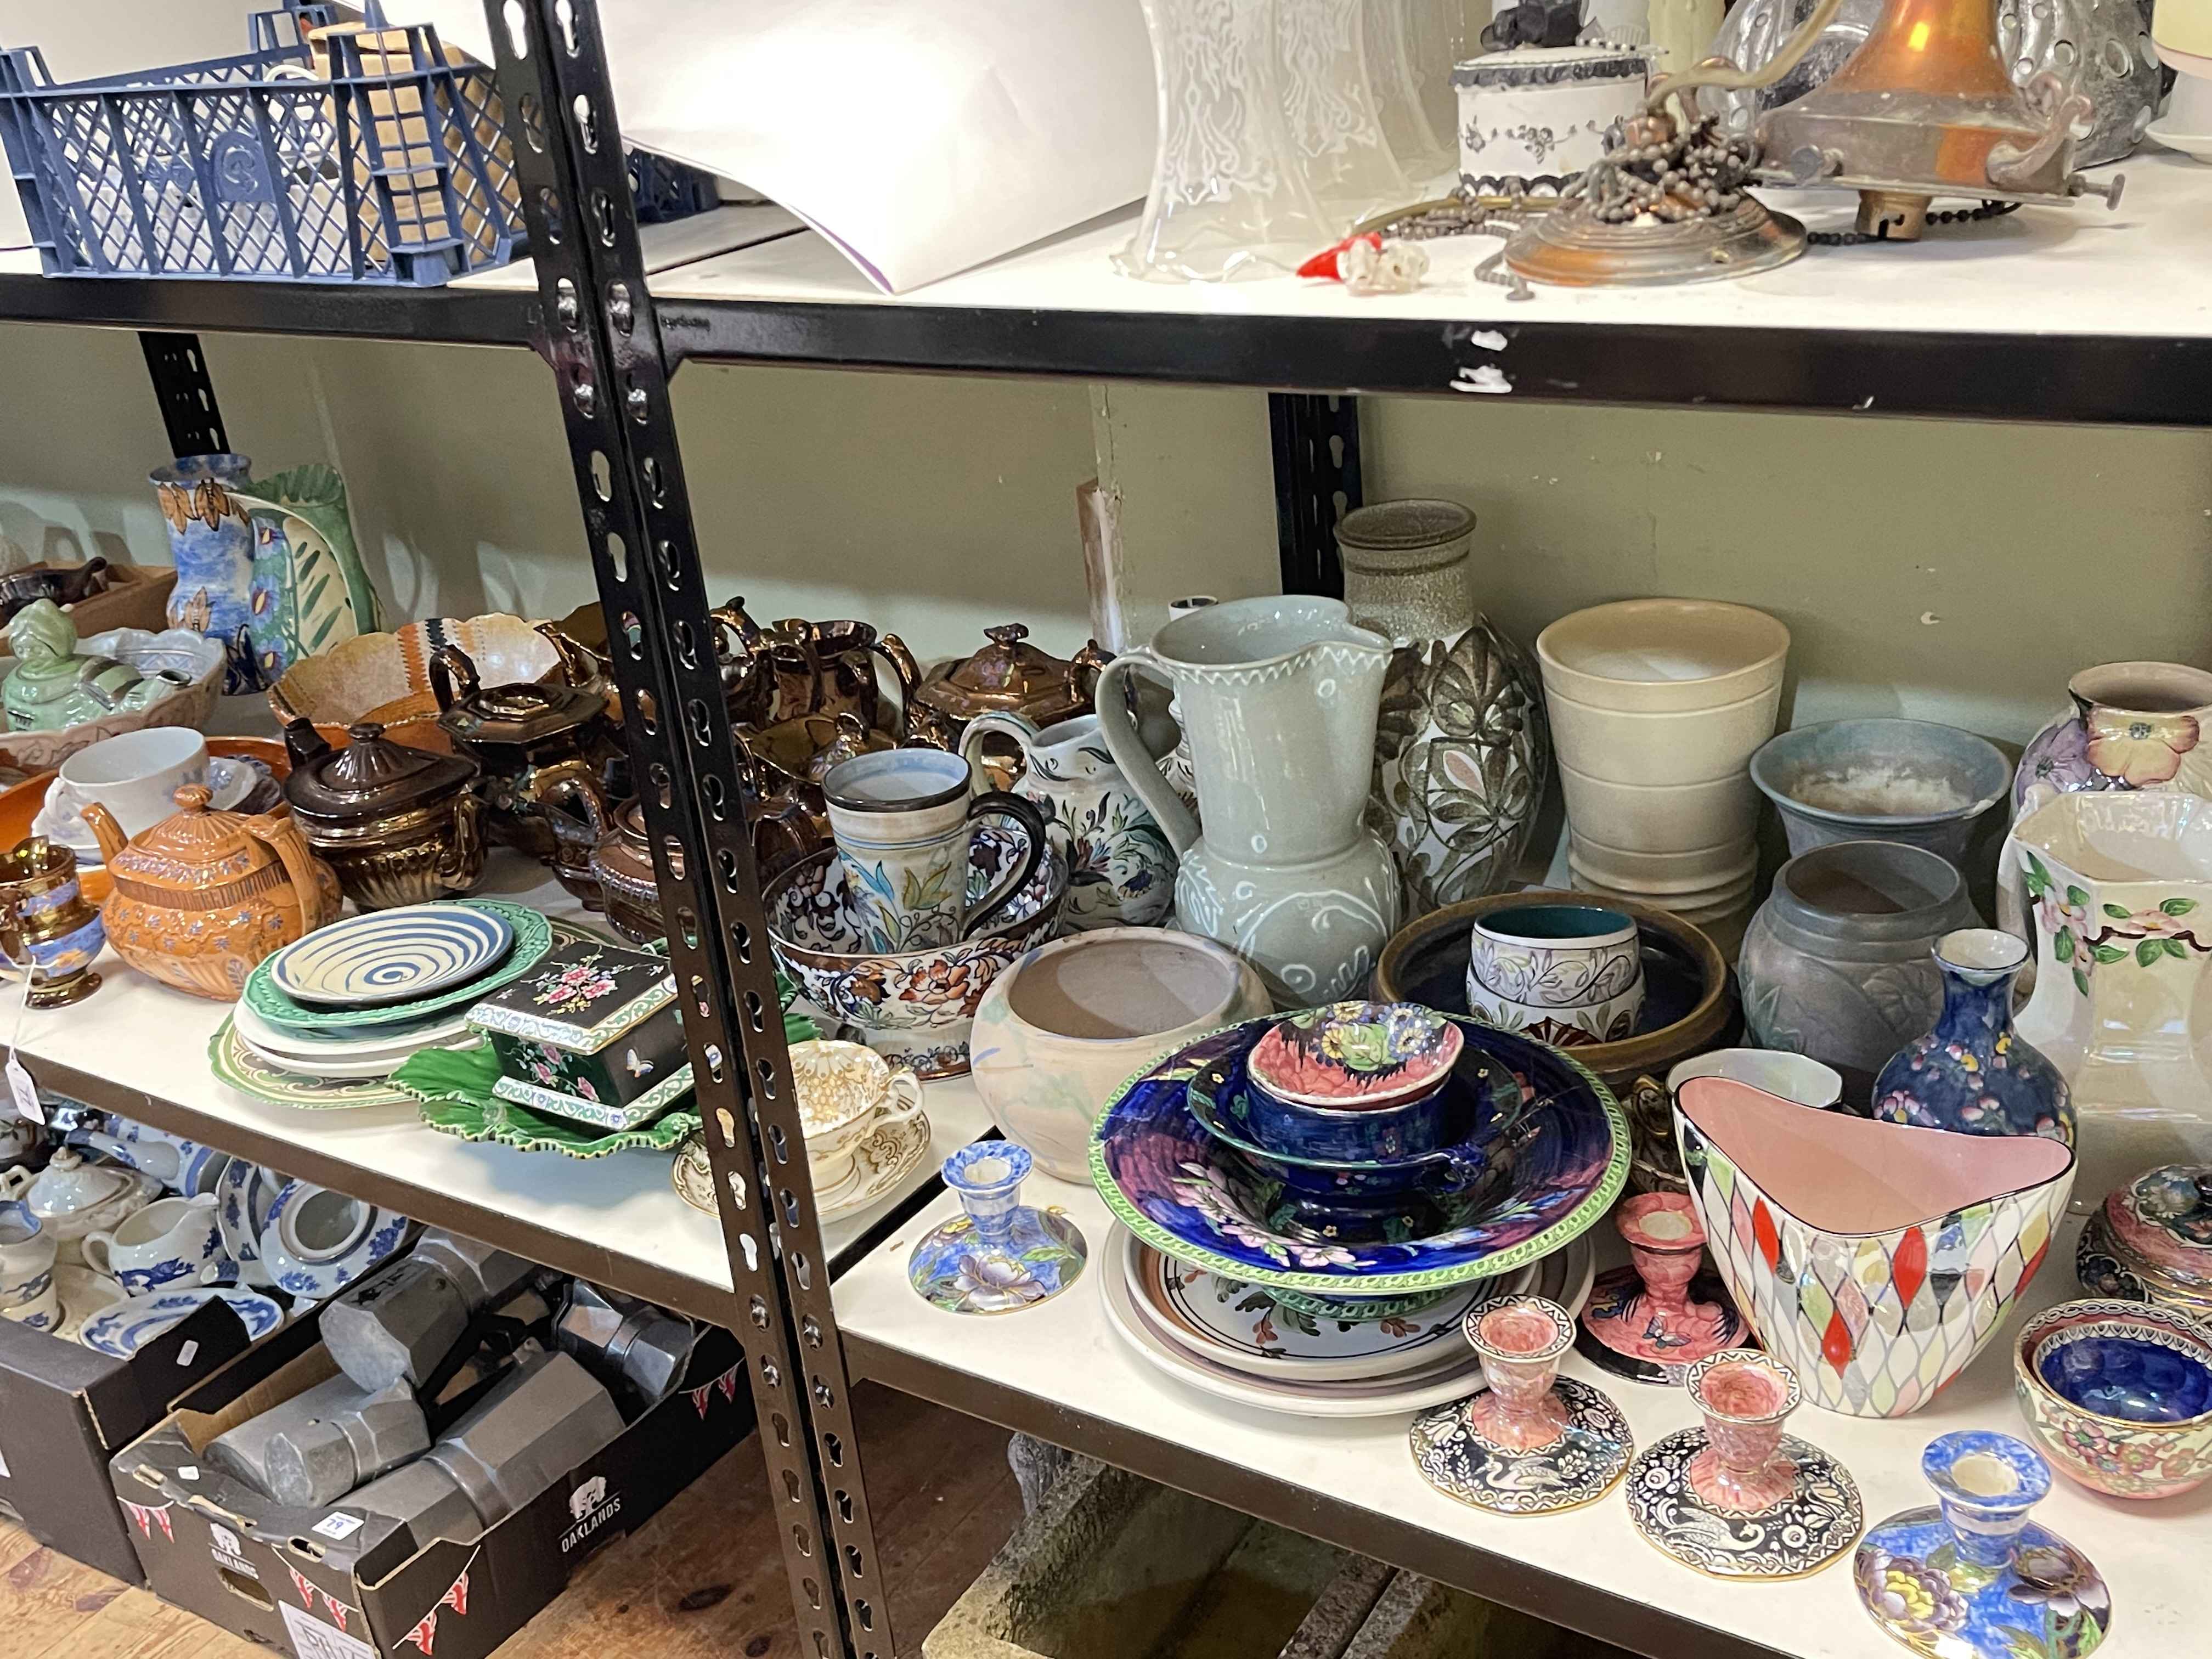 Collection of early porcelain, lustre teapots, decorative porcelain, Maling, Crown Ducal, etc. - Image 2 of 2